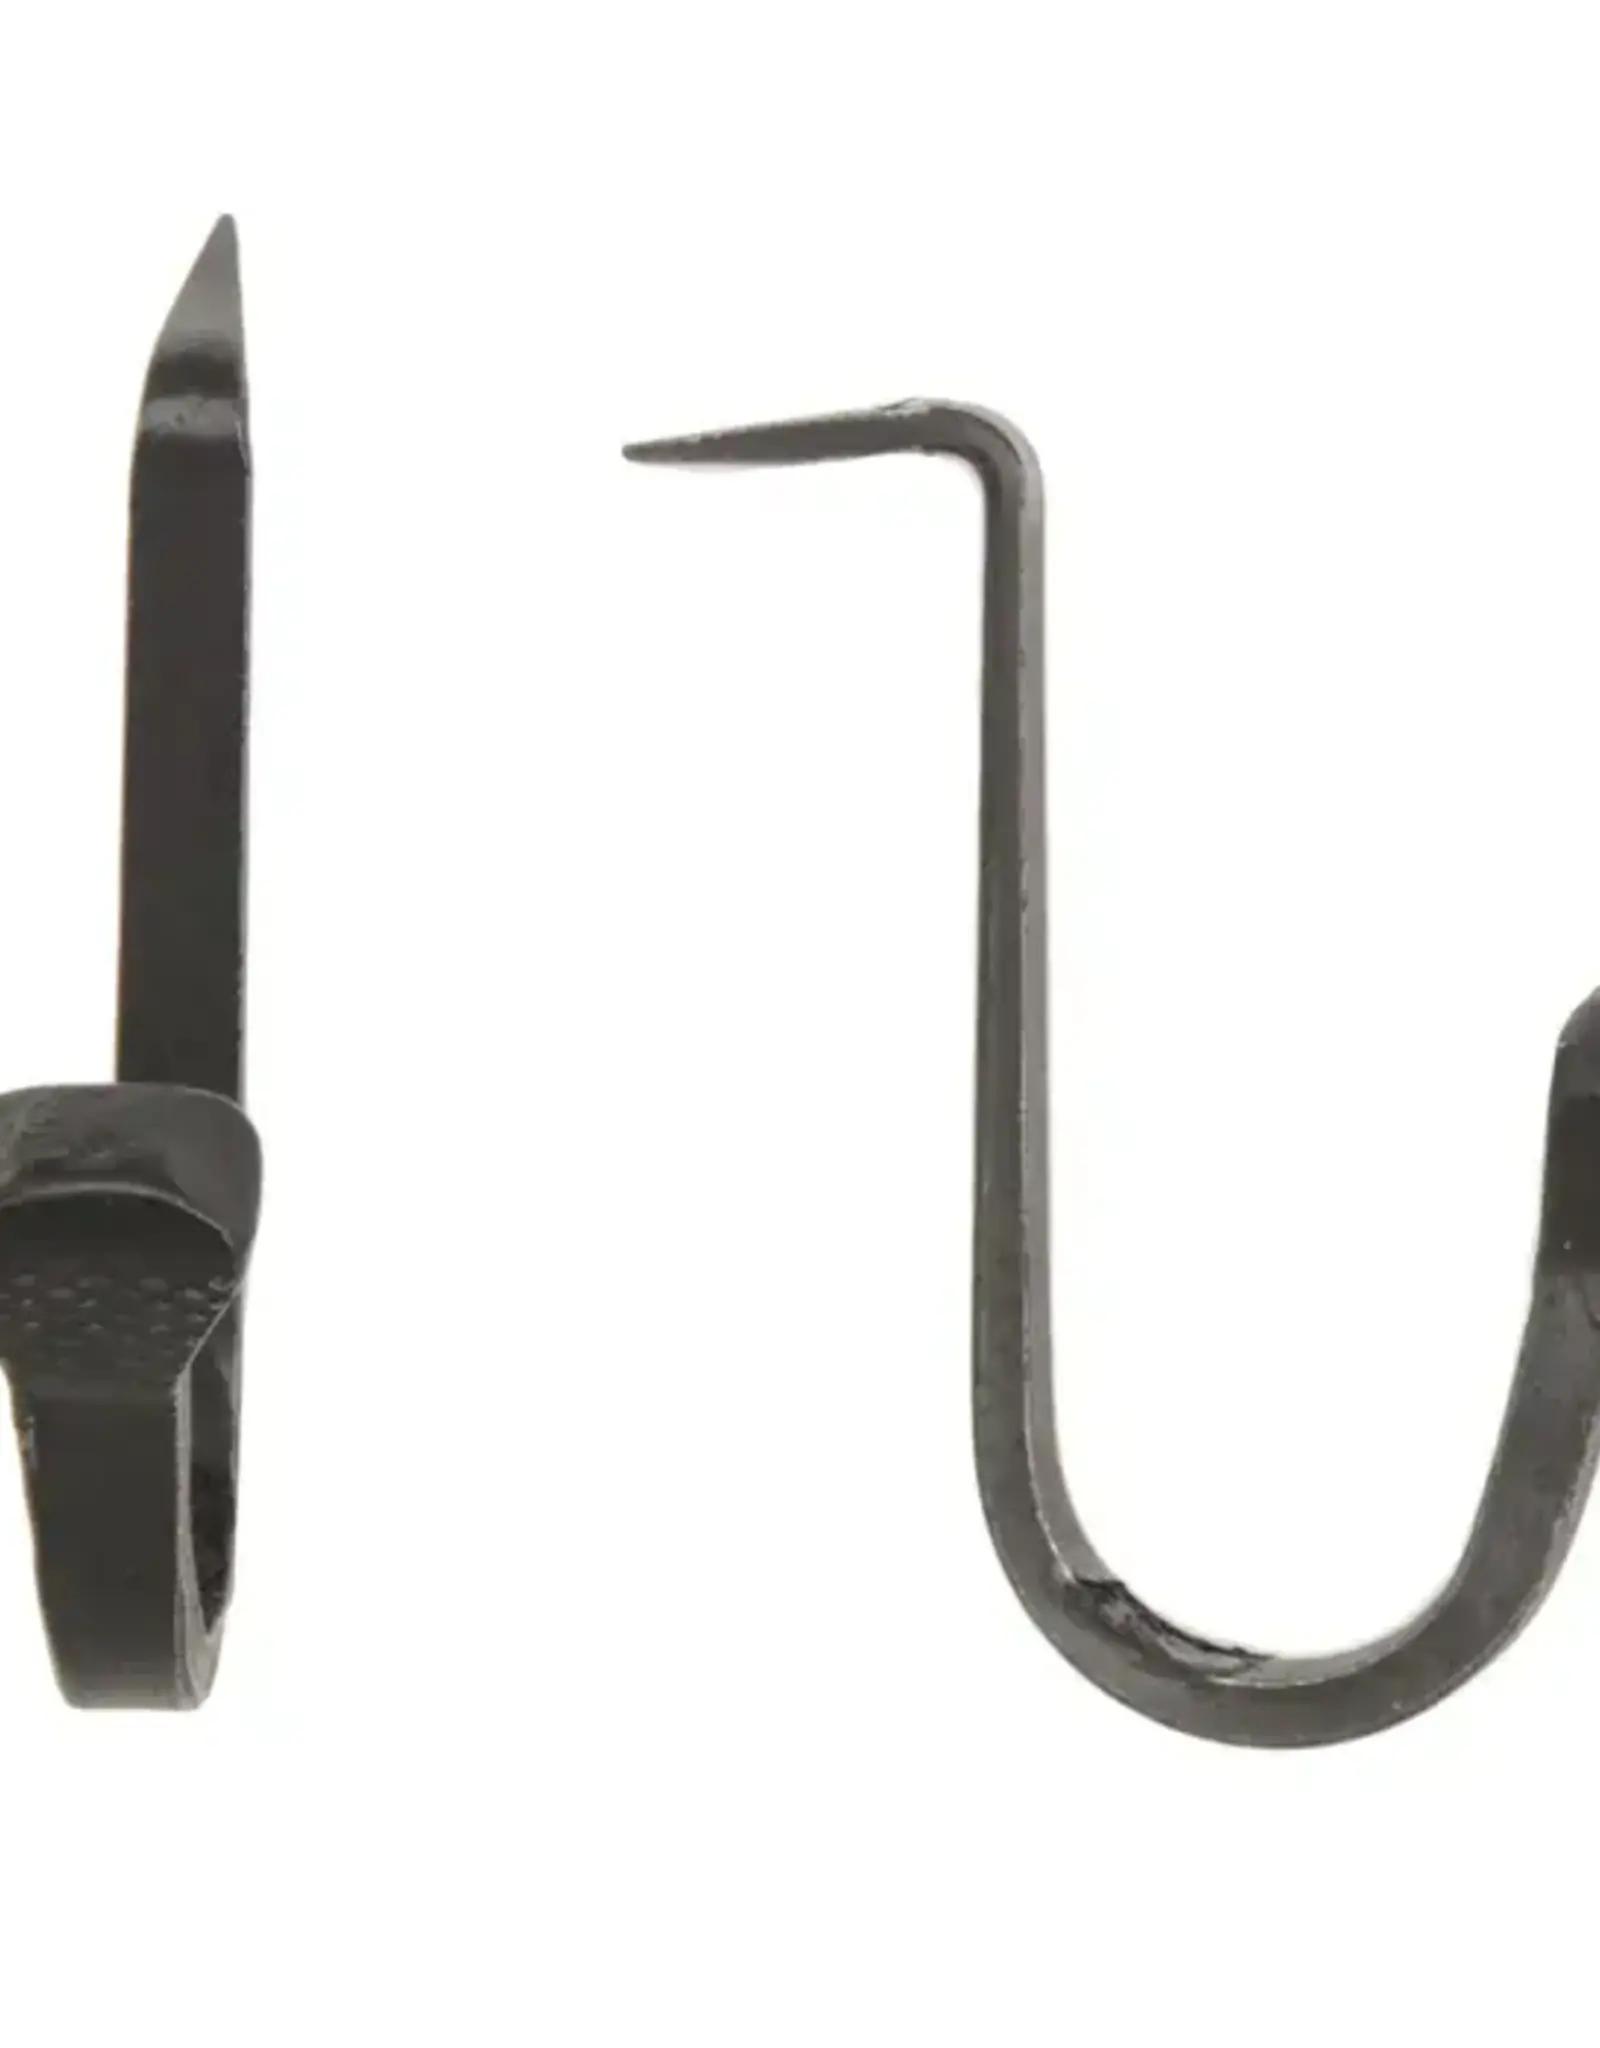 Irvin's Tinware Wrought Iron Nail Hook, Large